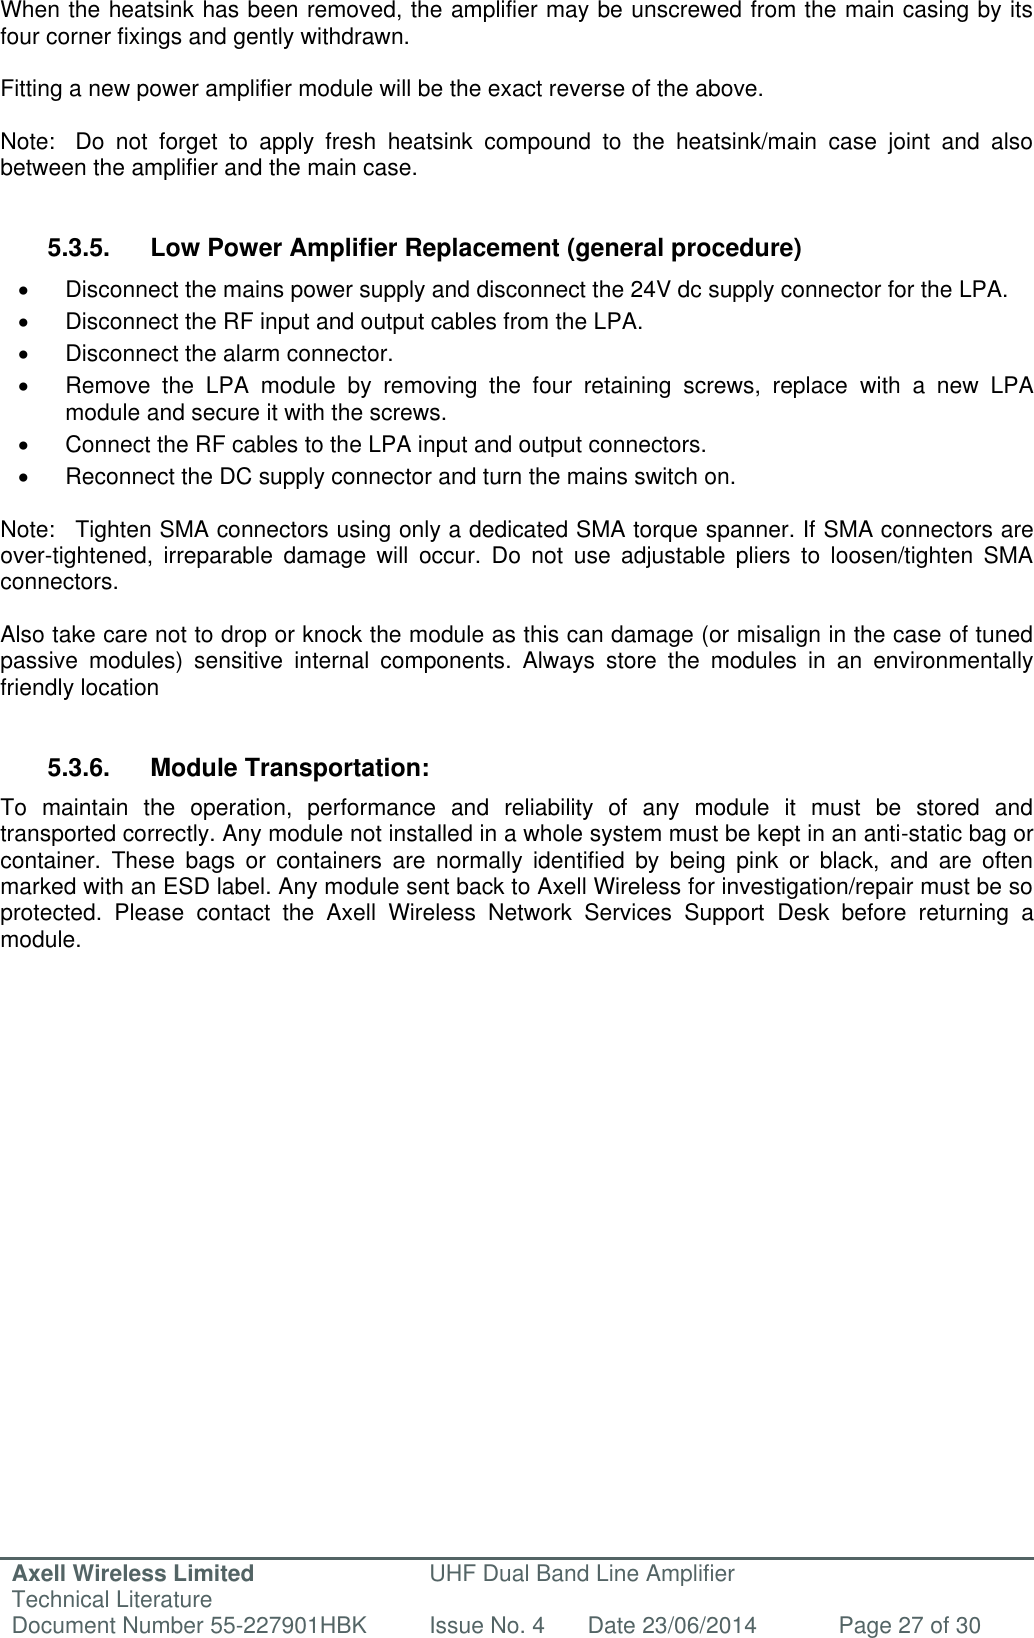 Axell Wireless Limited Technical Literature UHF Dual Band Line Amplifier Document Number 55-227901HBK Issue No. 4 Date 23/06/2014 Page 27 of 30   When the heatsink has been removed, the amplifier may be unscrewed from the main casing by its four corner fixings and gently withdrawn.  Fitting a new power amplifier module will be the exact reverse of the above.  Note:  Do  not  forget  to  apply  fresh  heatsink  compound  to  the  heatsink/main  case  joint  and  also between the amplifier and the main case.   5.3.5.  Low Power Amplifier Replacement (general procedure)   Disconnect the mains power supply and disconnect the 24V dc supply connector for the LPA.   Disconnect the RF input and output cables from the LPA.   Disconnect the alarm connector.   Remove  the  LPA  module  by  removing  the  four  retaining  screws,  replace  with  a  new  LPA module and secure it with the screws.   Connect the RF cables to the LPA input and output connectors.    Reconnect the DC supply connector and turn the mains switch on.  Note:  Tighten SMA connectors using only a dedicated SMA torque spanner. If SMA connectors are over-tightened,  irreparable  damage  will  occur.  Do  not  use  adjustable  pliers  to  loosen/tighten  SMA connectors.  Also take care not to drop or knock the module as this can damage (or misalign in the case of tuned passive  modules)  sensitive  internal  components.  Always  store  the  modules  in  an  environmentally friendly location   5.3.6.  Module Transportation: To  maintain  the  operation,  performance  and  reliability  of  any  module  it  must  be  stored  and transported correctly. Any module not installed in a whole system must be kept in an anti-static bag or container.  These  bags  or  containers  are  normally  identified  by  being  pink  or  black,  and  are  often marked with an ESD label. Any module sent back to Axell Wireless for investigation/repair must be so protected.  Please  contact  the  Axell  Wireless  Network  Services  Support  Desk  before  returning  a module.         